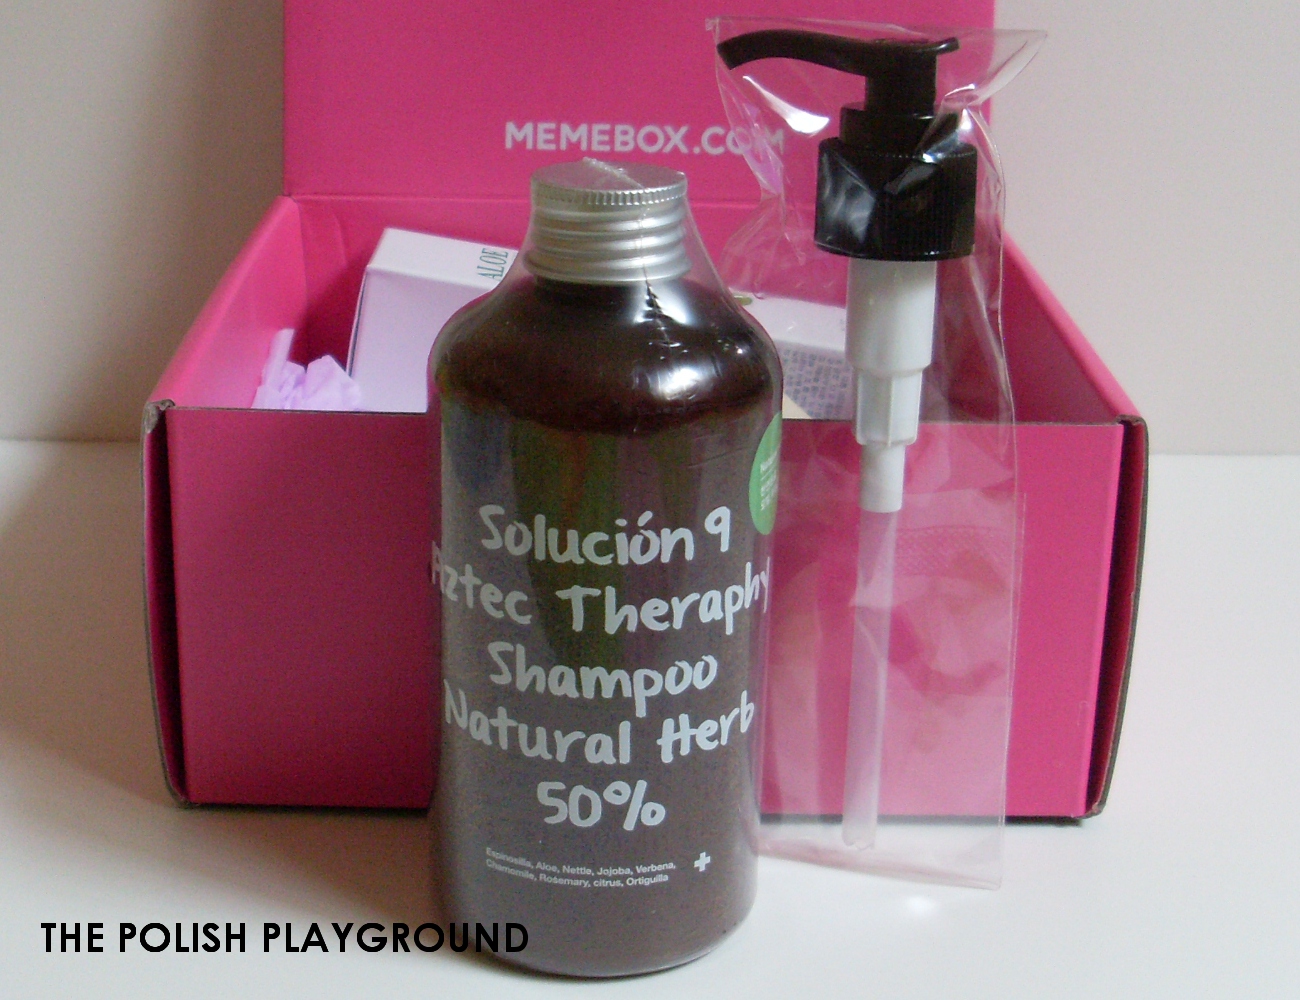 Memebox Special #64 Green Food Cosmetics Unboxing - Solucion 9 Aztec Therapy Shampoo